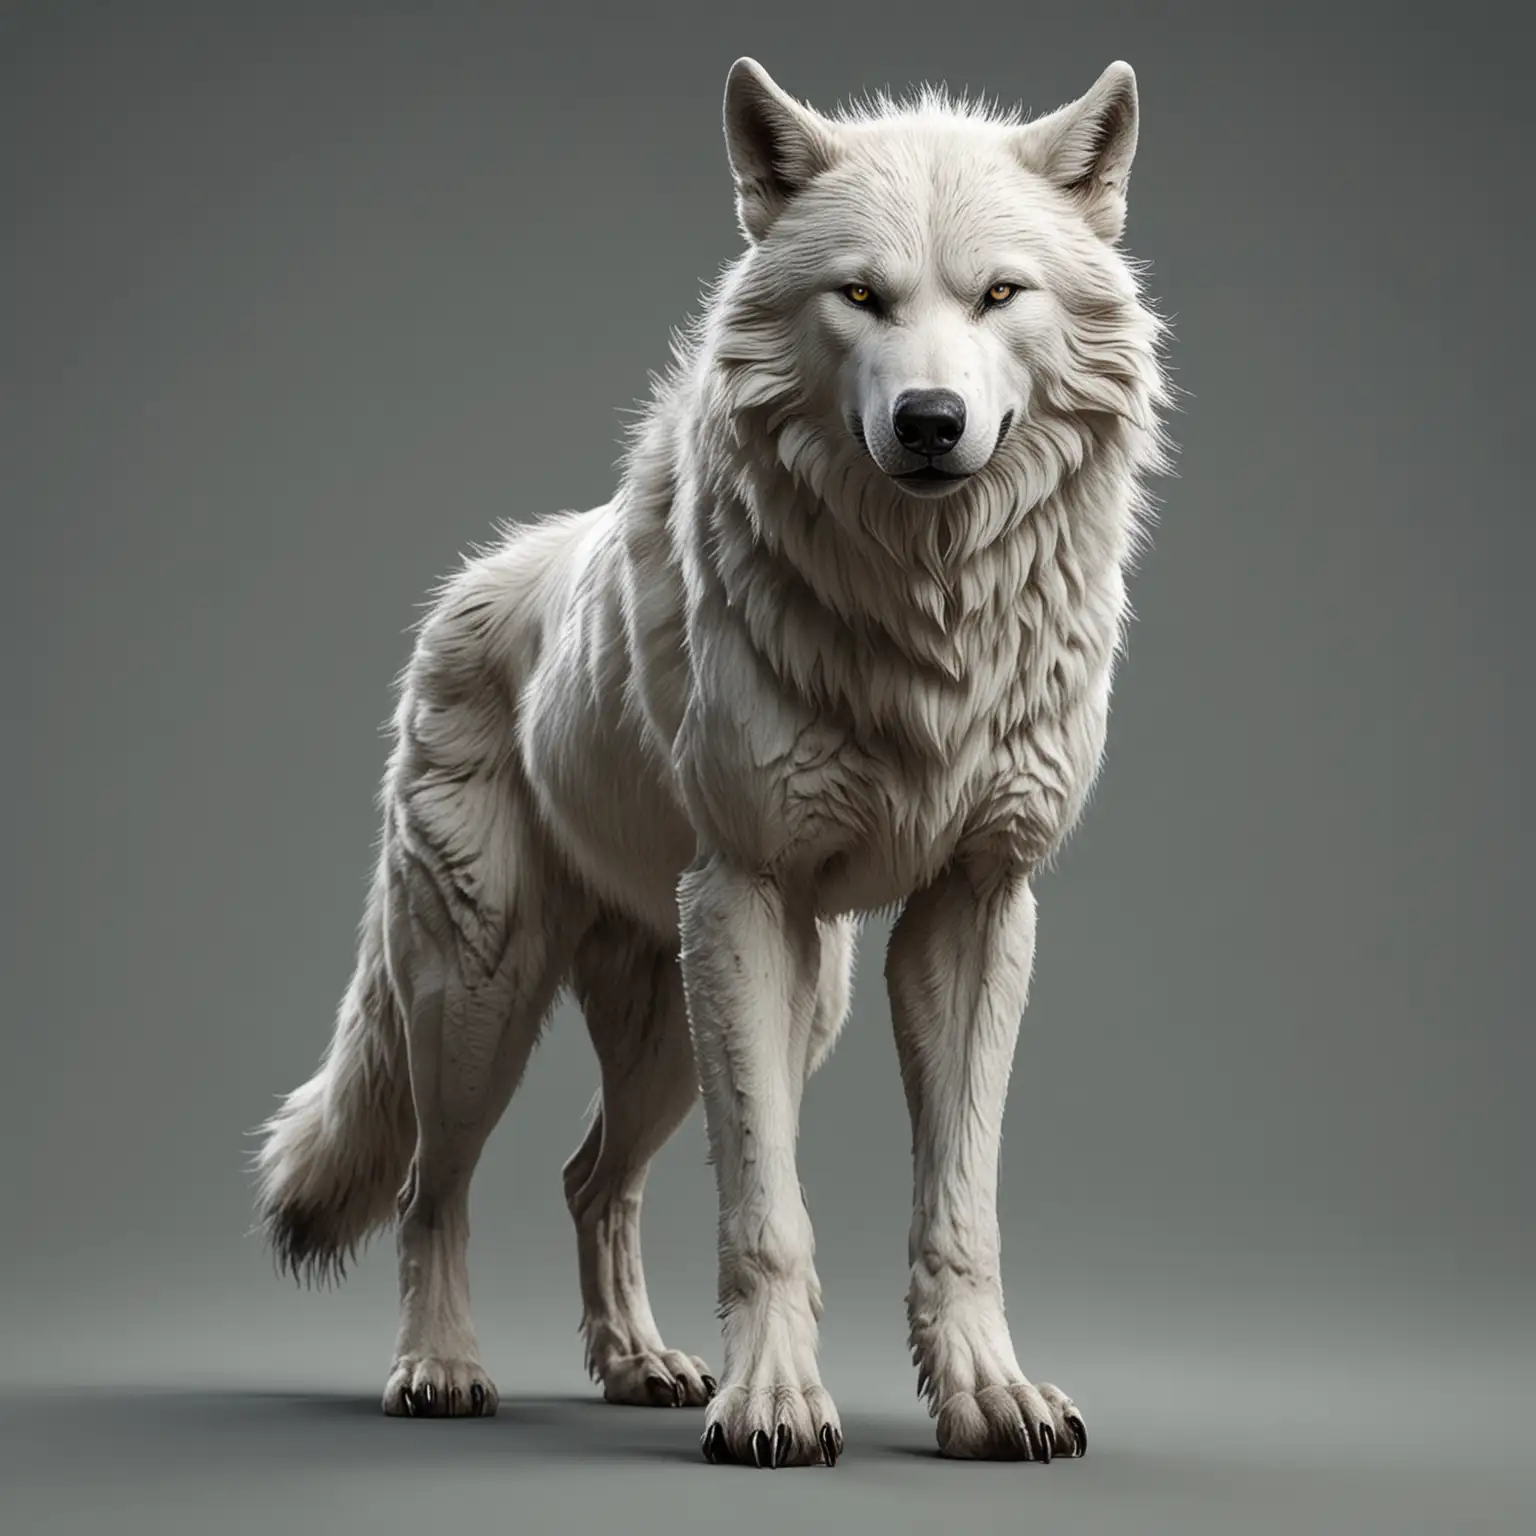 Realistic Big White Wolf Standing Upright